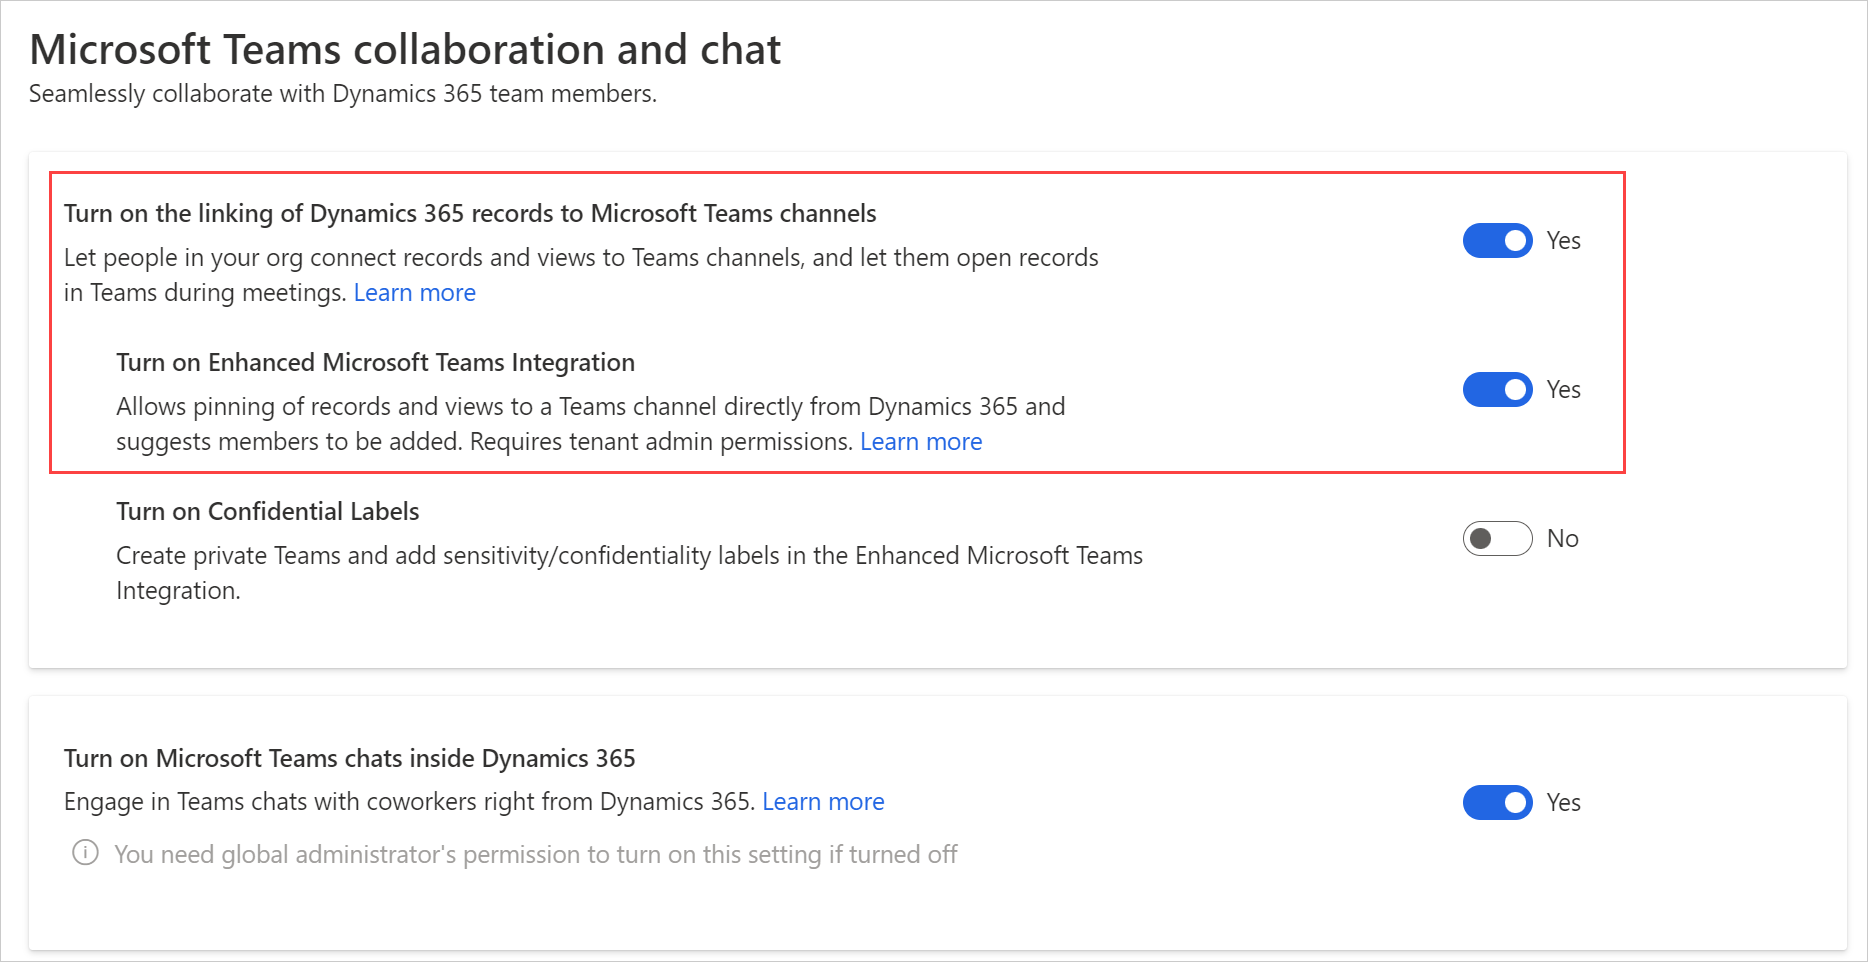 Screenshot depicting Microsoft Team collaboration and chat settings